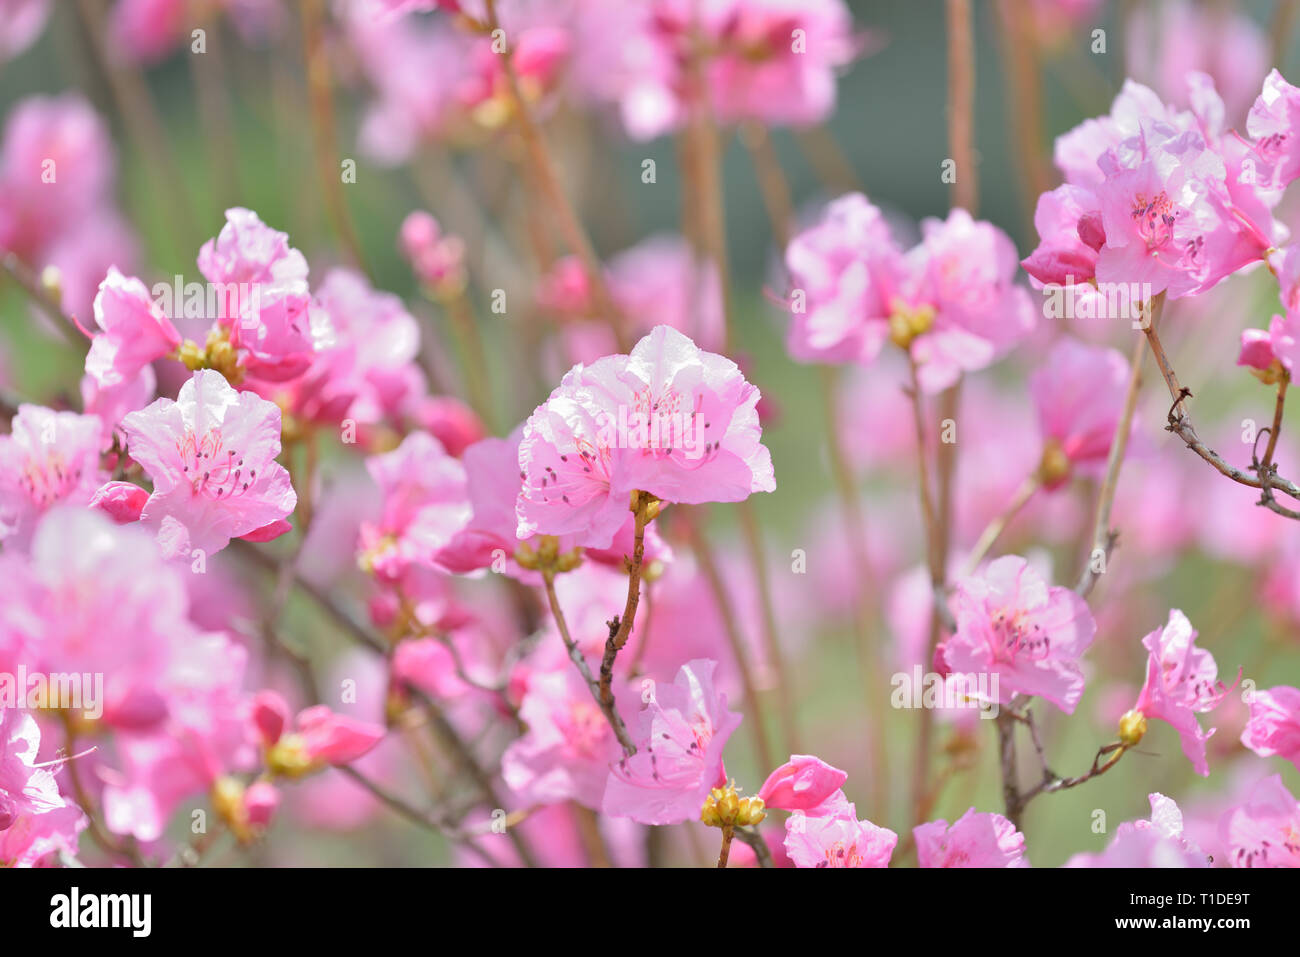 Pink rhododendron flowers on bush branch, plant detail, early spring background Stock Photo